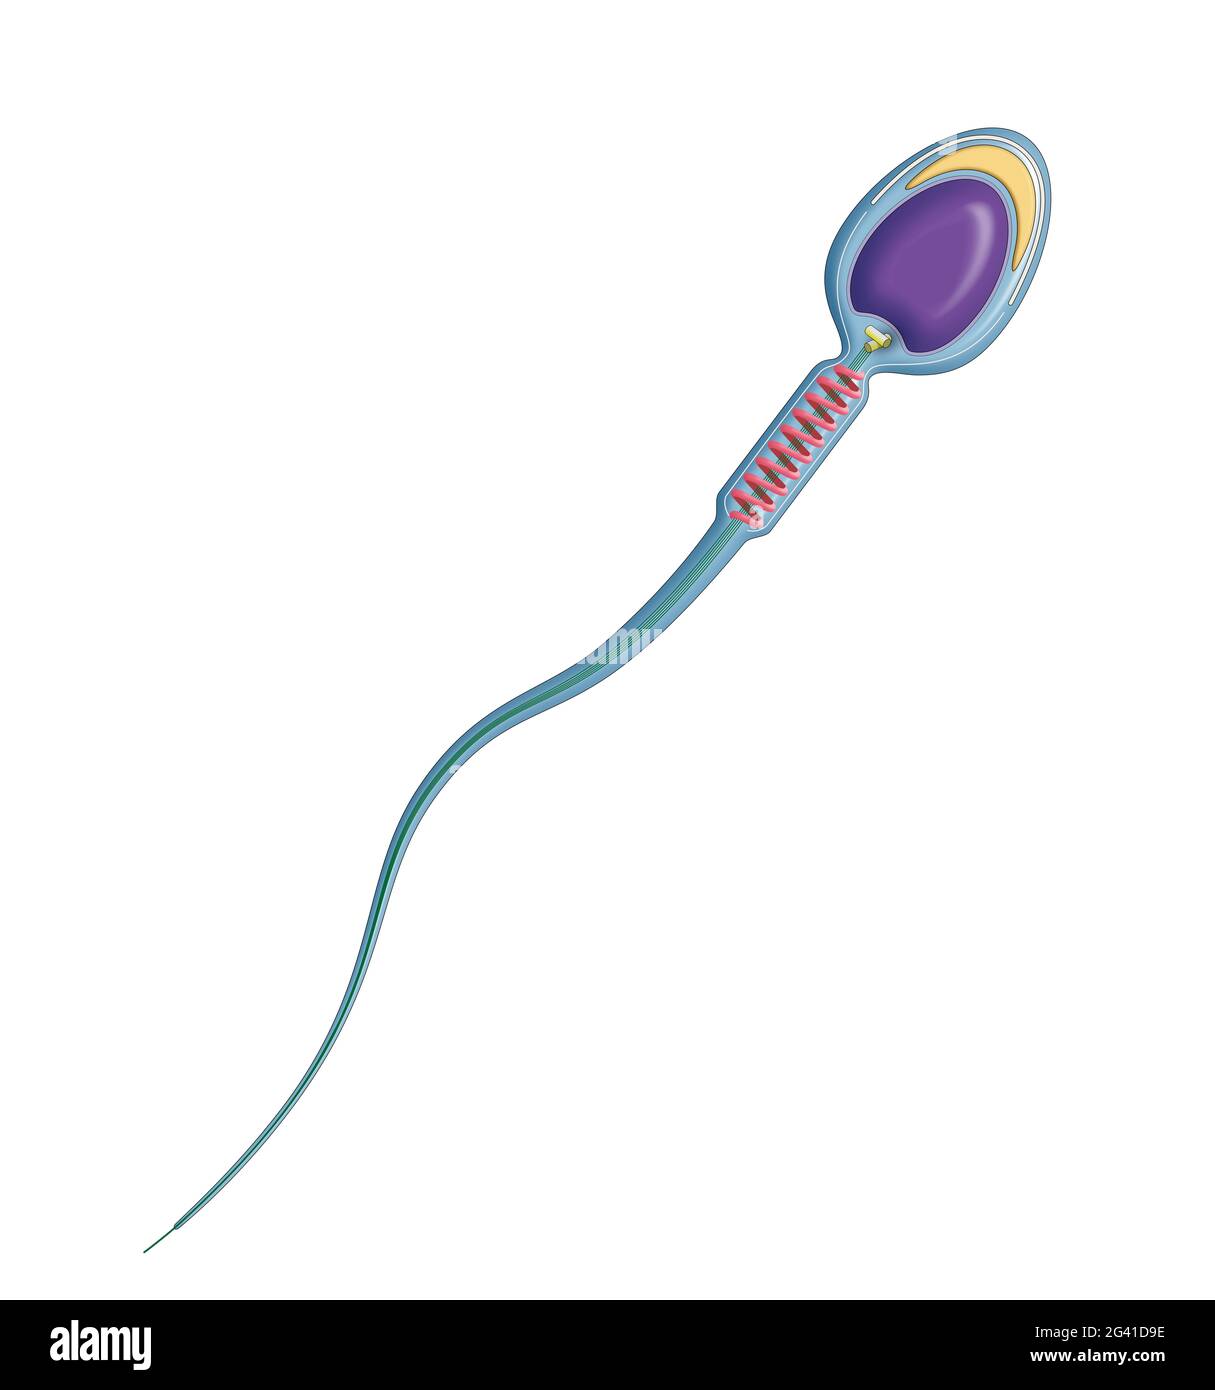 Sperm is the male reproductive cell. Human spermatozoon anatomy Stock Photo